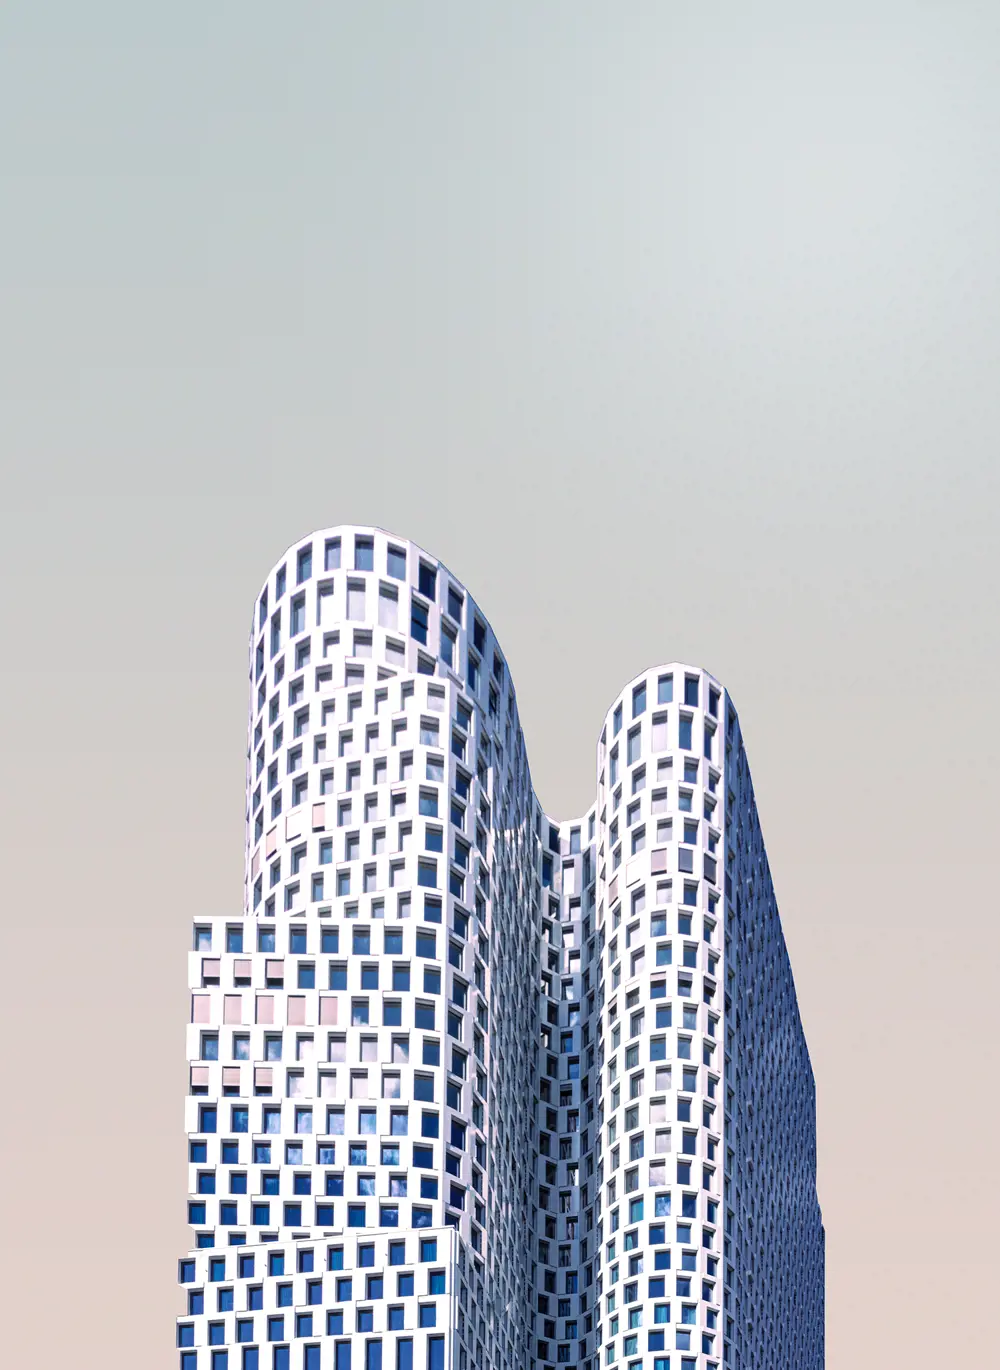 A graphic image of a curved tower on a pastel background.